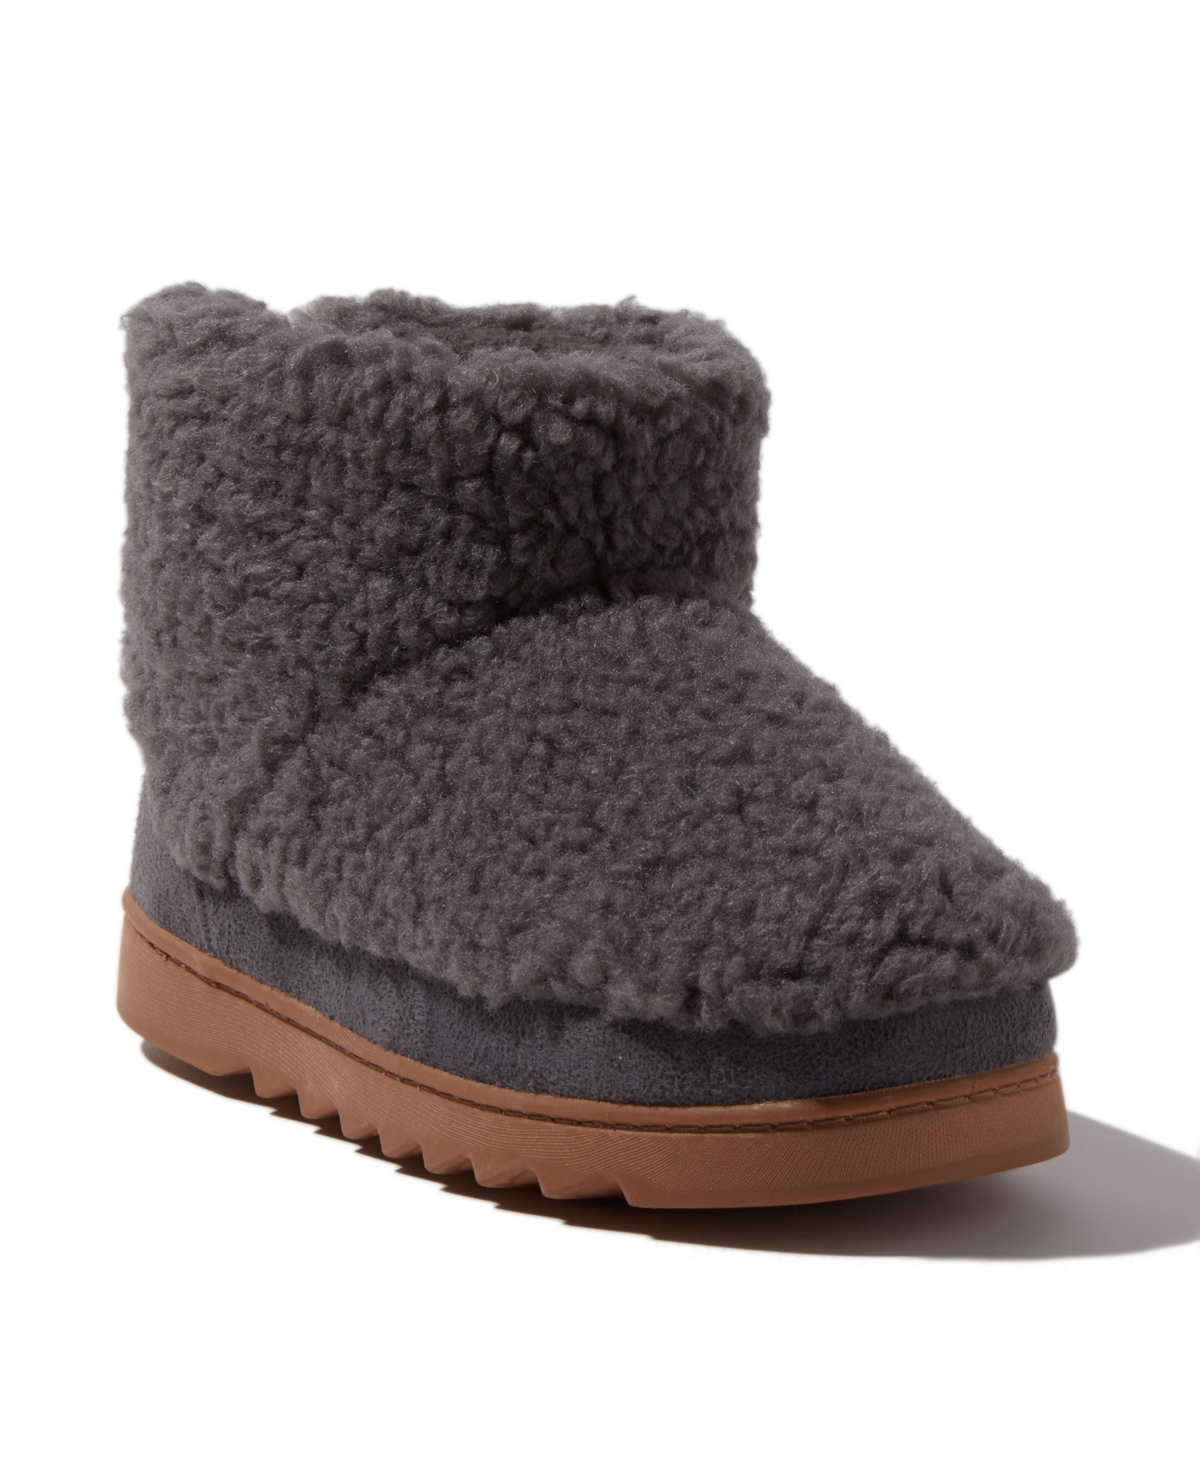 Women's Whitney Teddy Bootie Slippers - CrÃ¨me Brulee